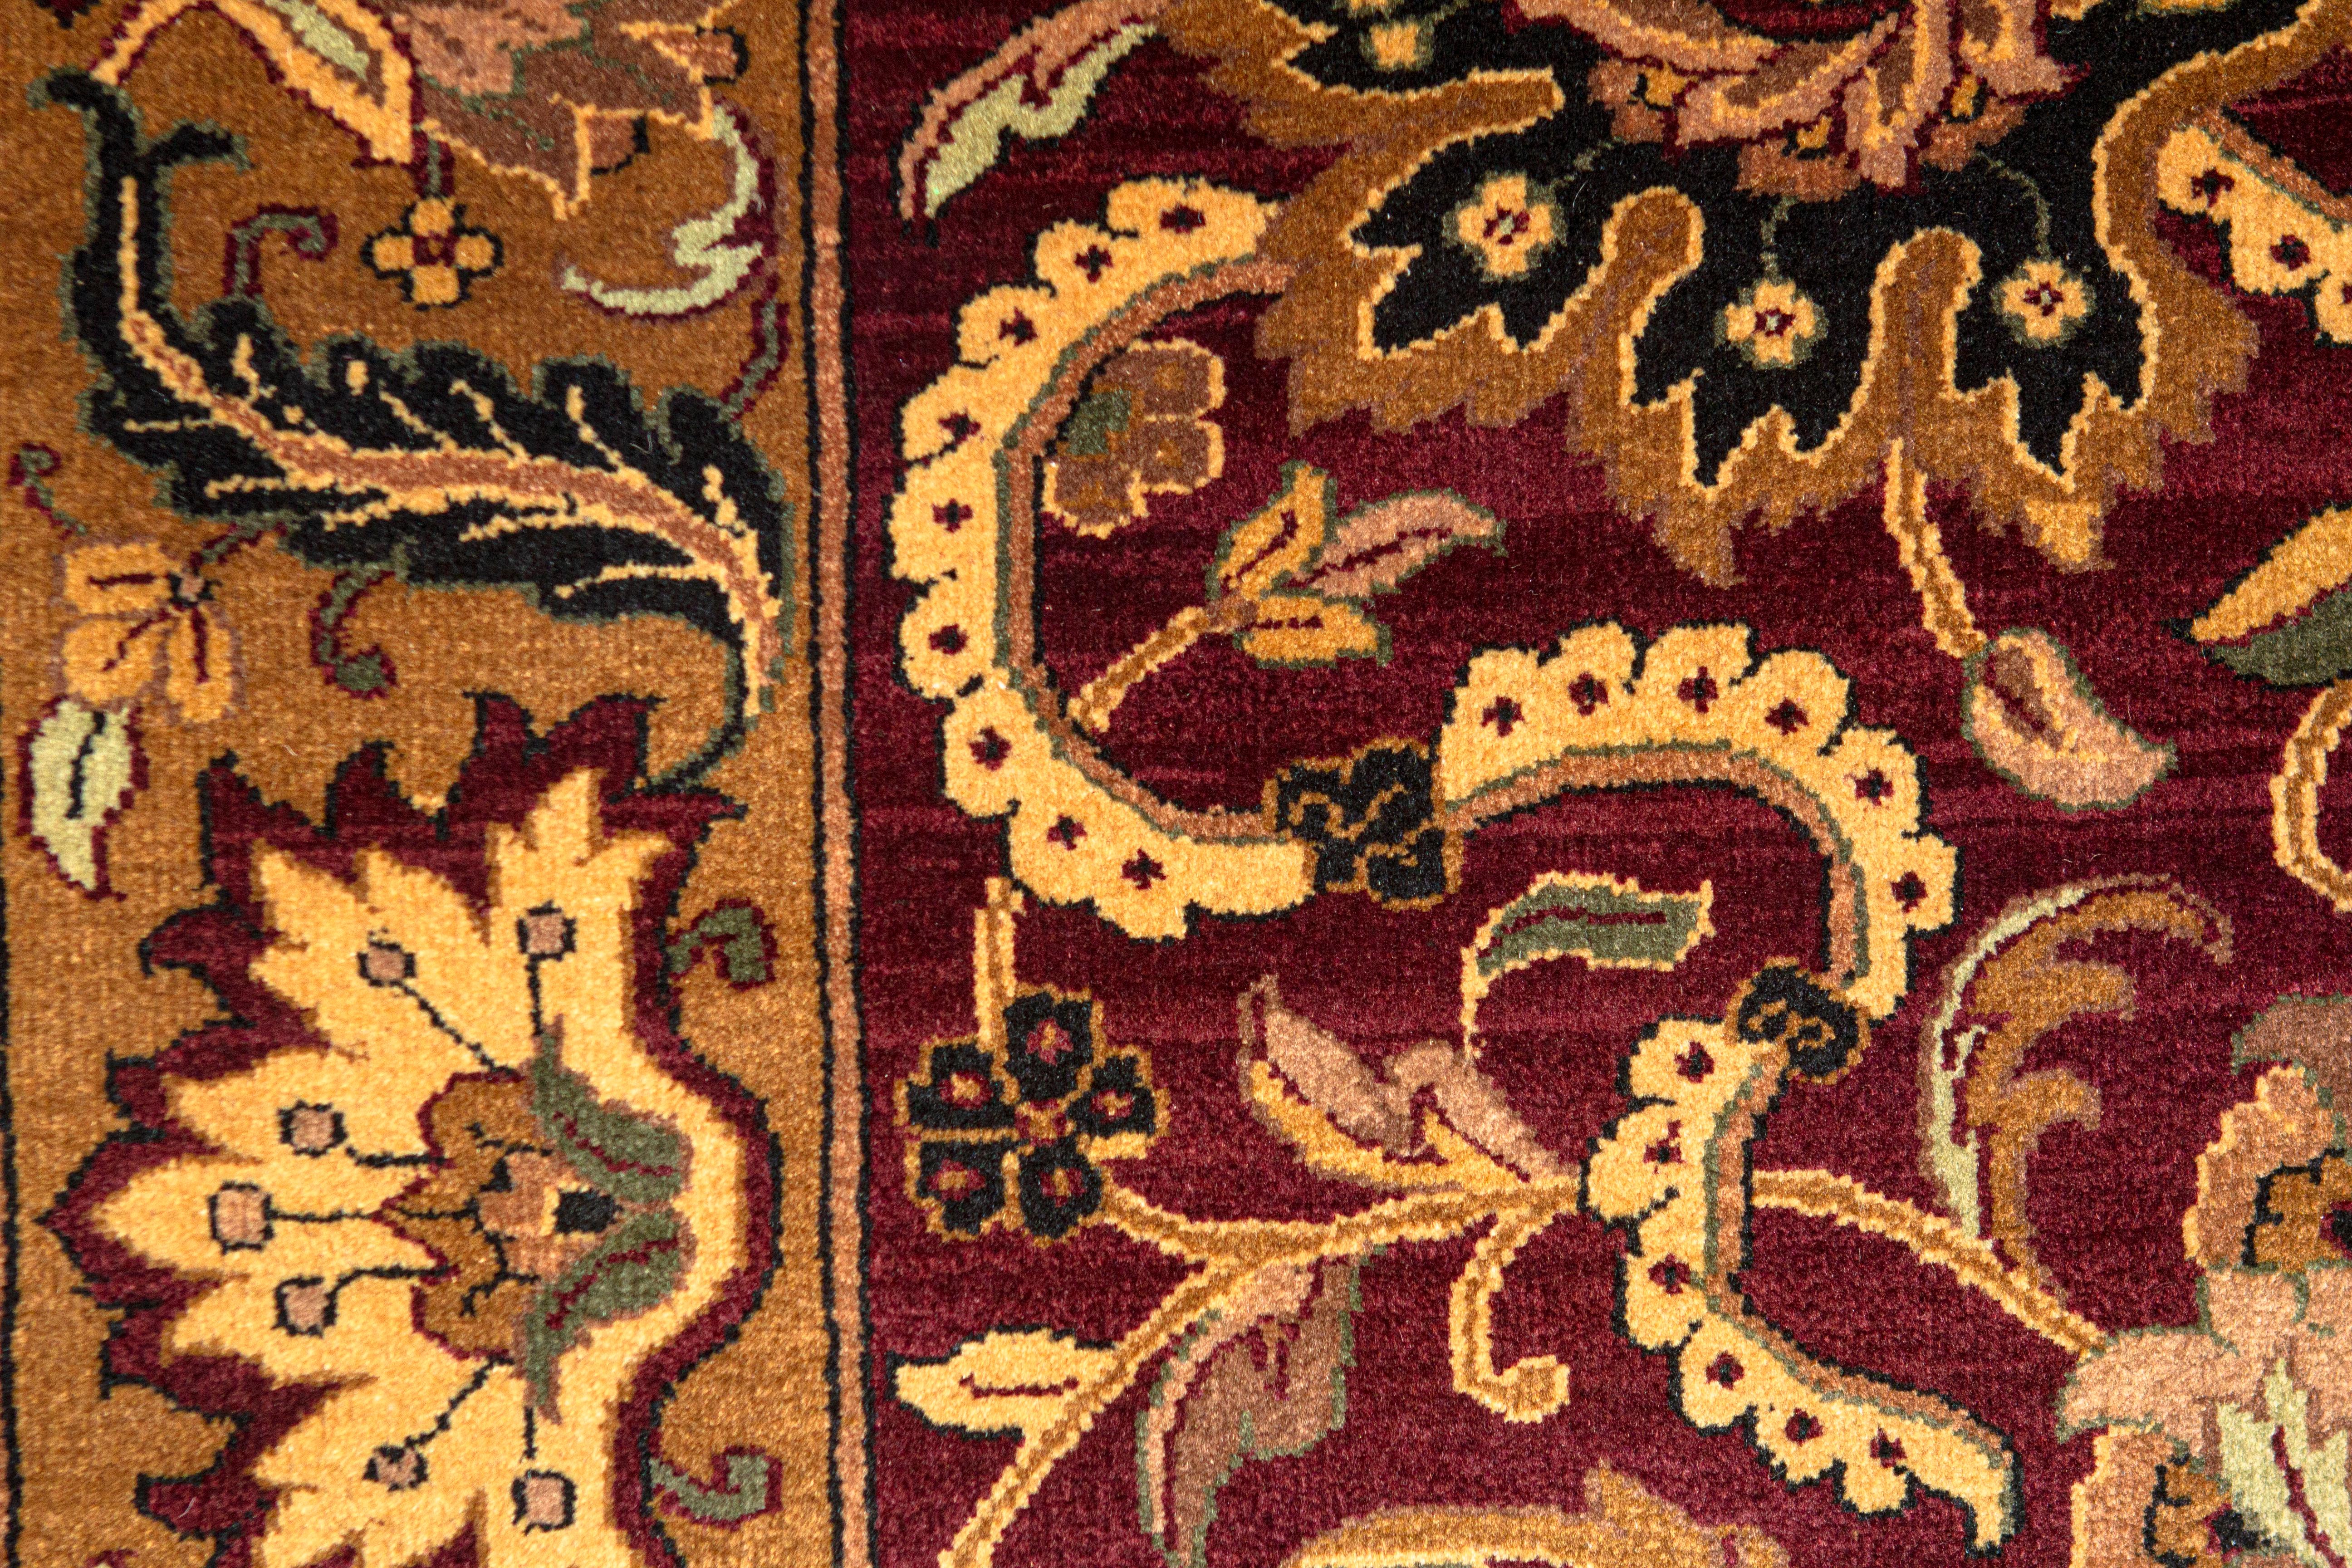 The inspiration for this collection comes from 16th century Indian carpet weavers, who created the most beautiful carpets for the Royal Courts of the Mogul Emperors. Based on authentic Oriental designs and handwoven in the traditional style.